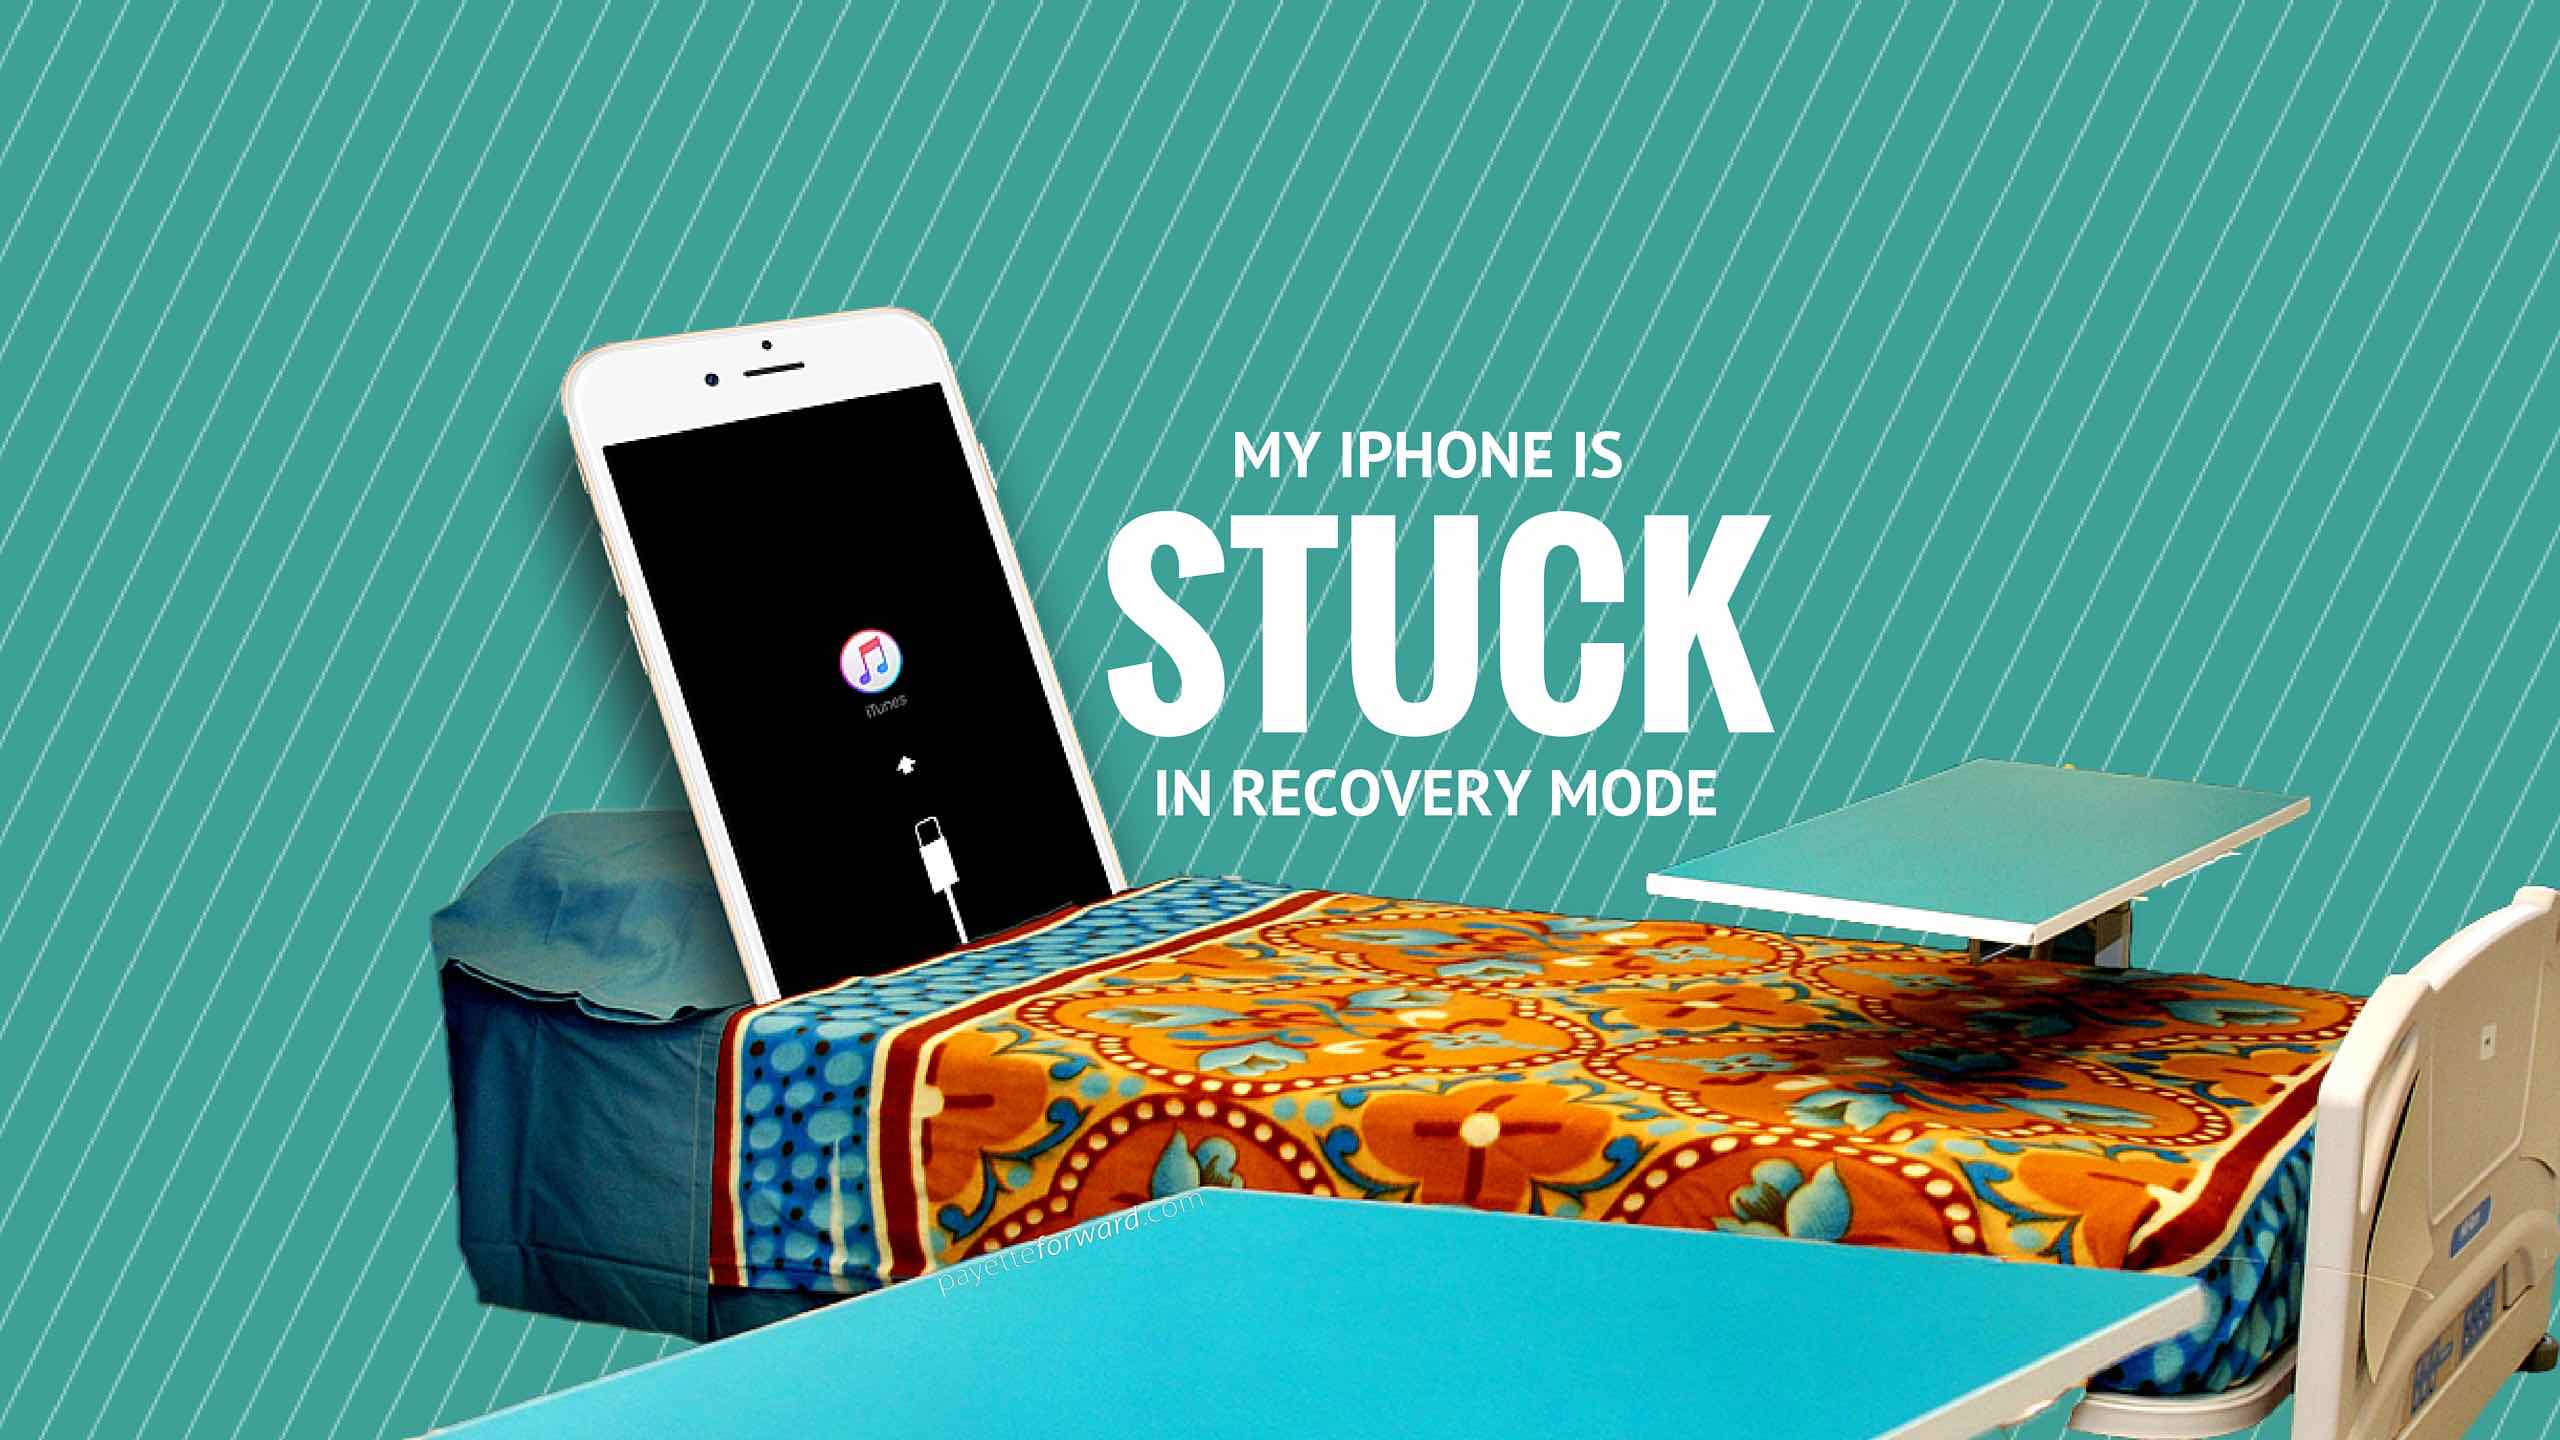 iphone recovery mode stuck